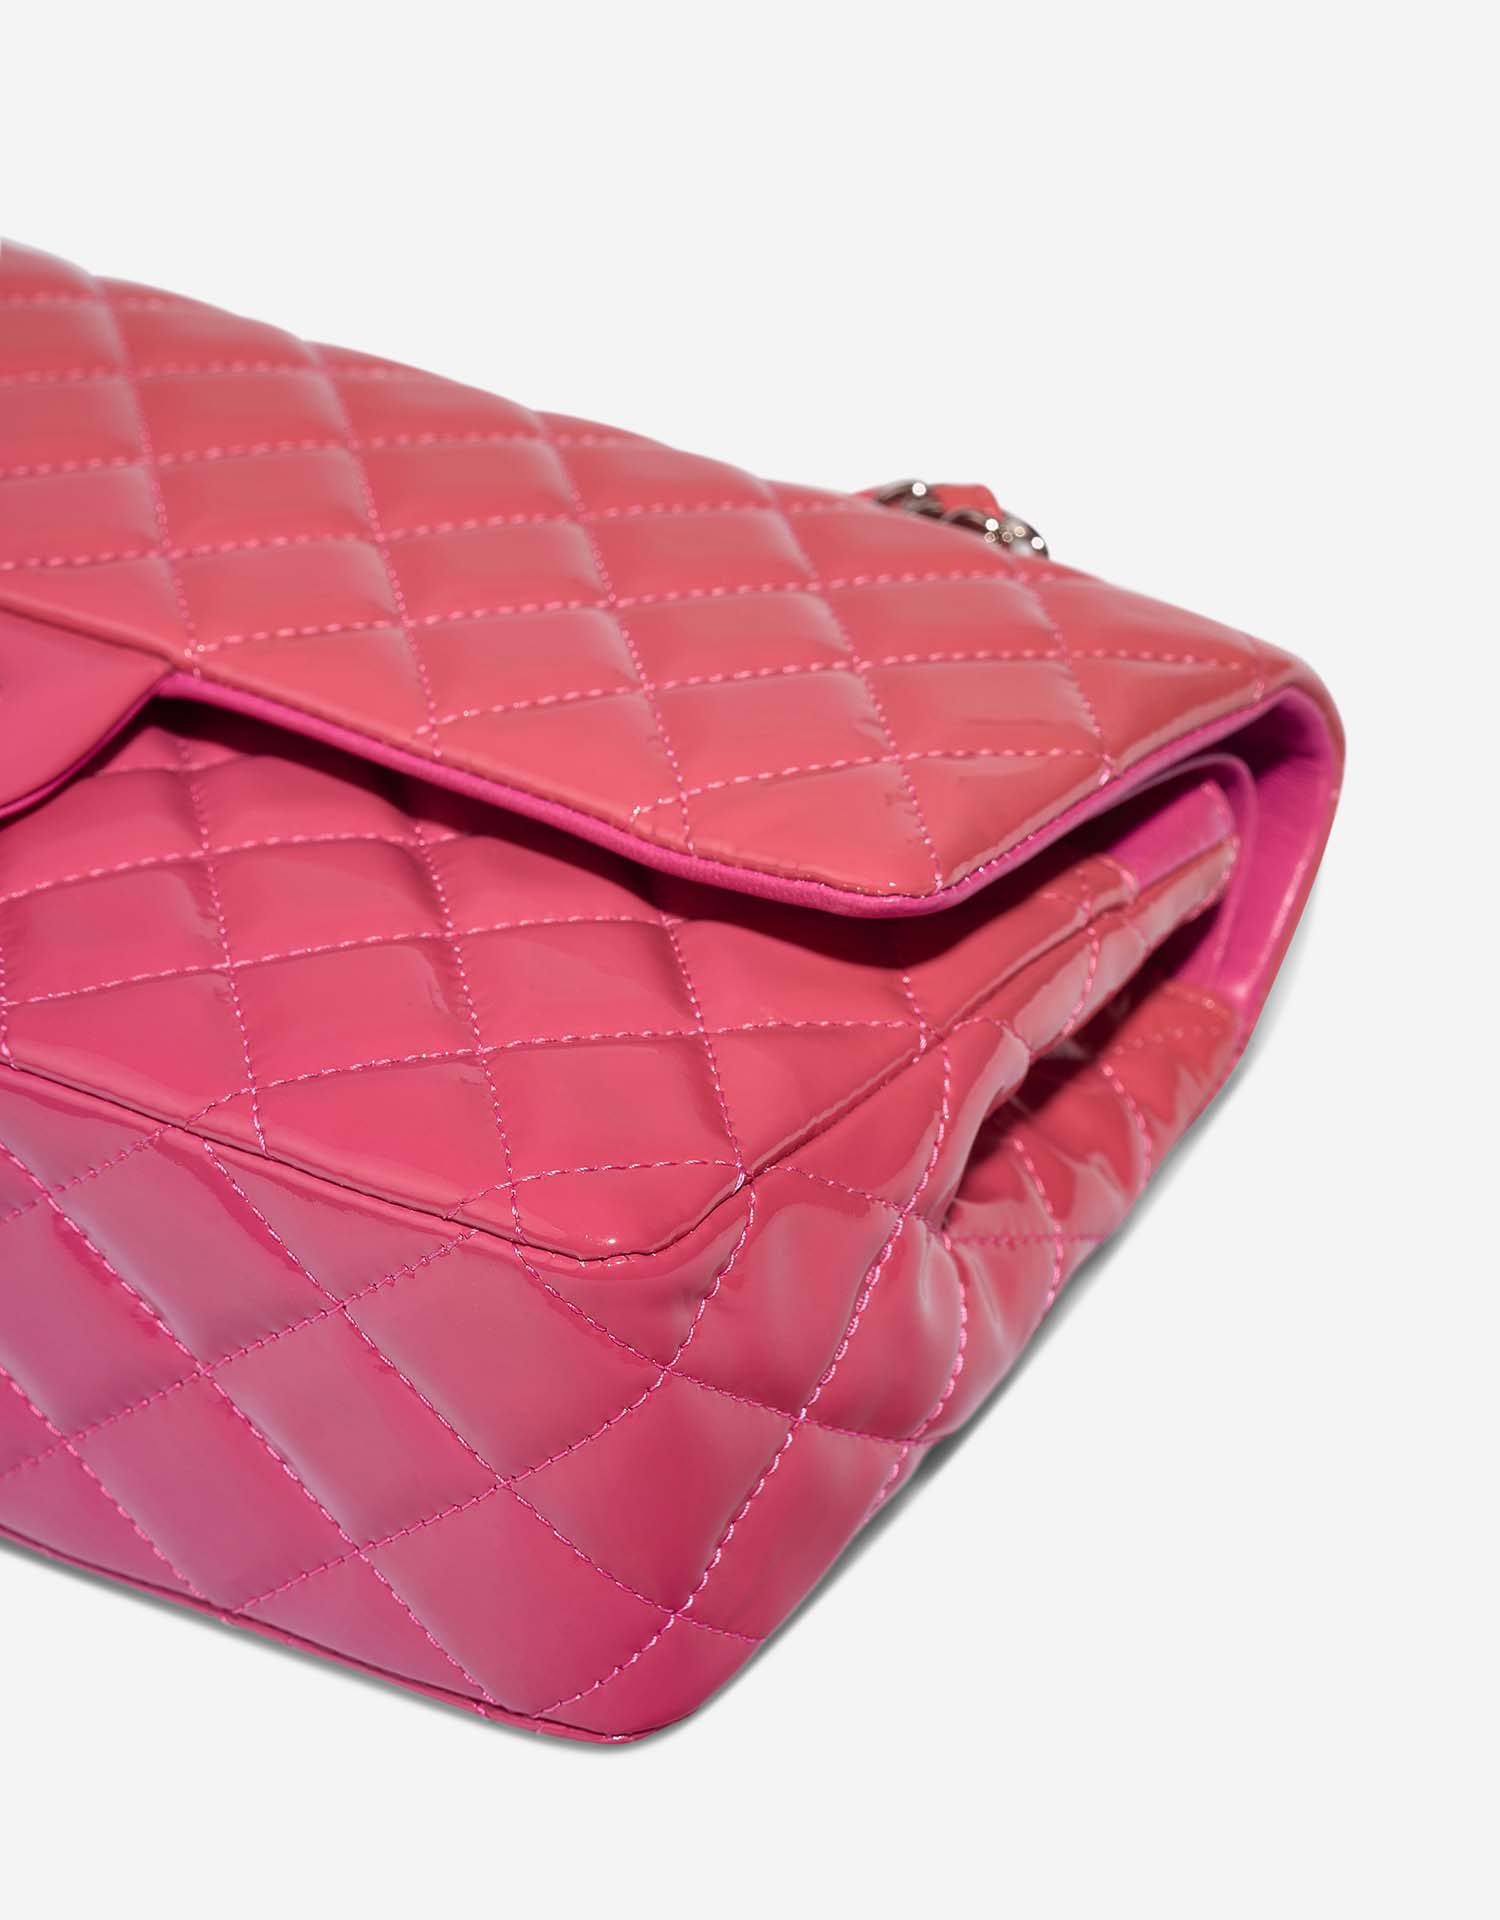 Chanel Timeless Medium HotPink-Fuchsia signs of wear | Sell your designer bag on Saclab.com